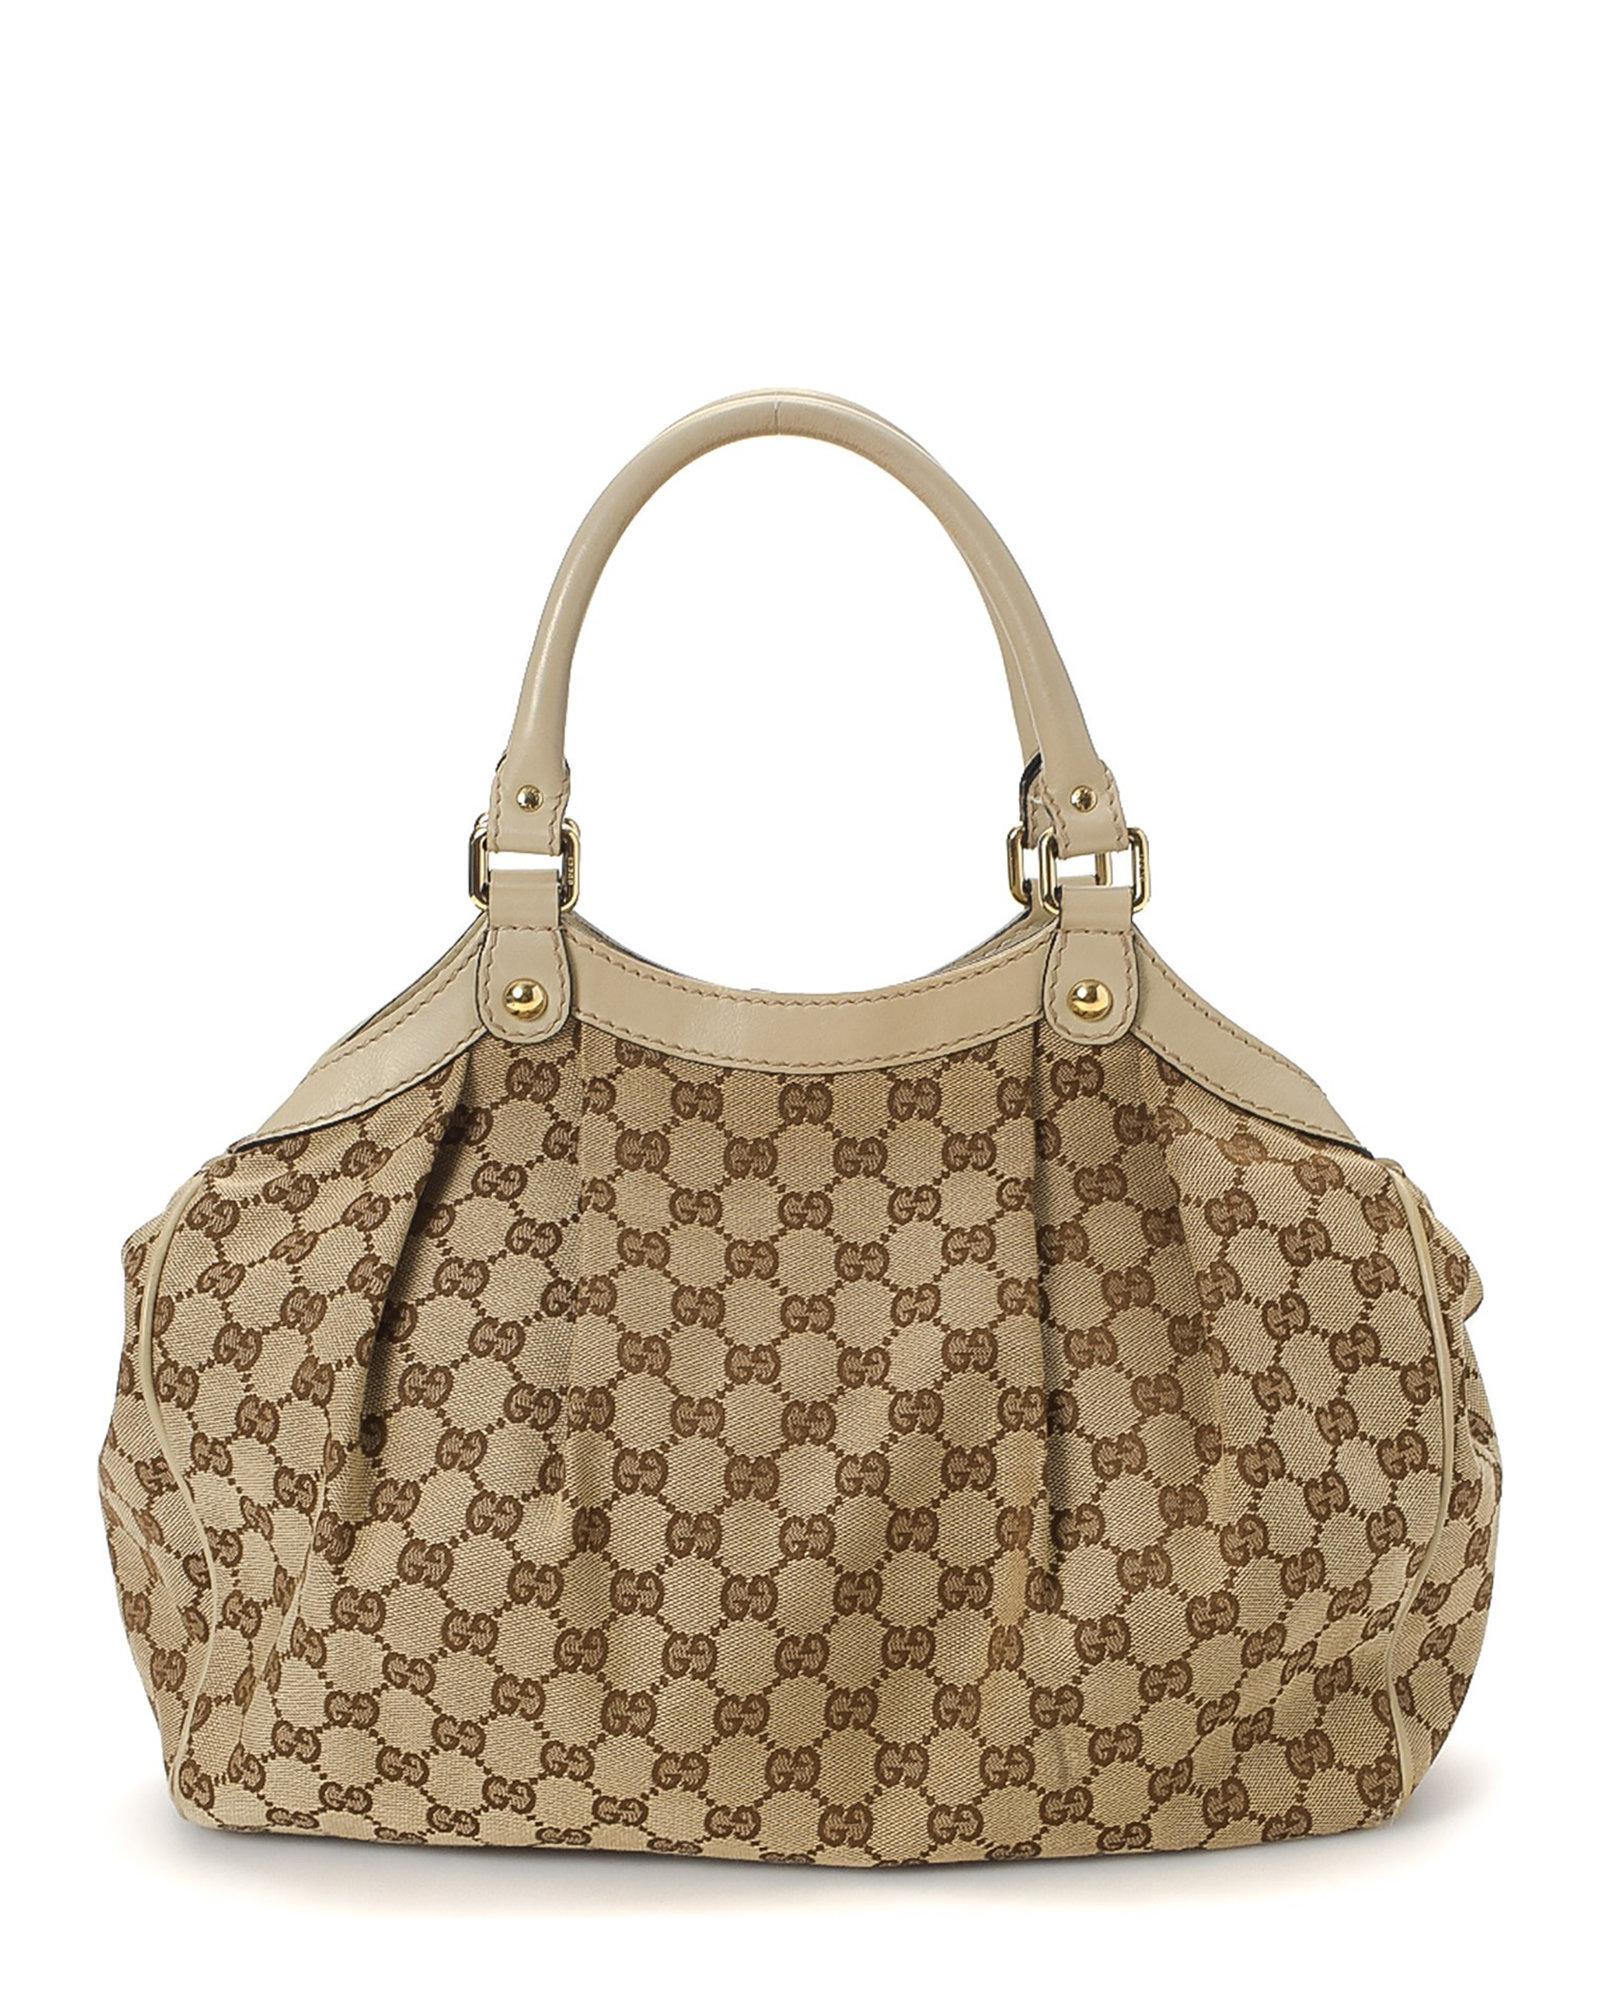 Top 84+ imagen gucci bags on clearance